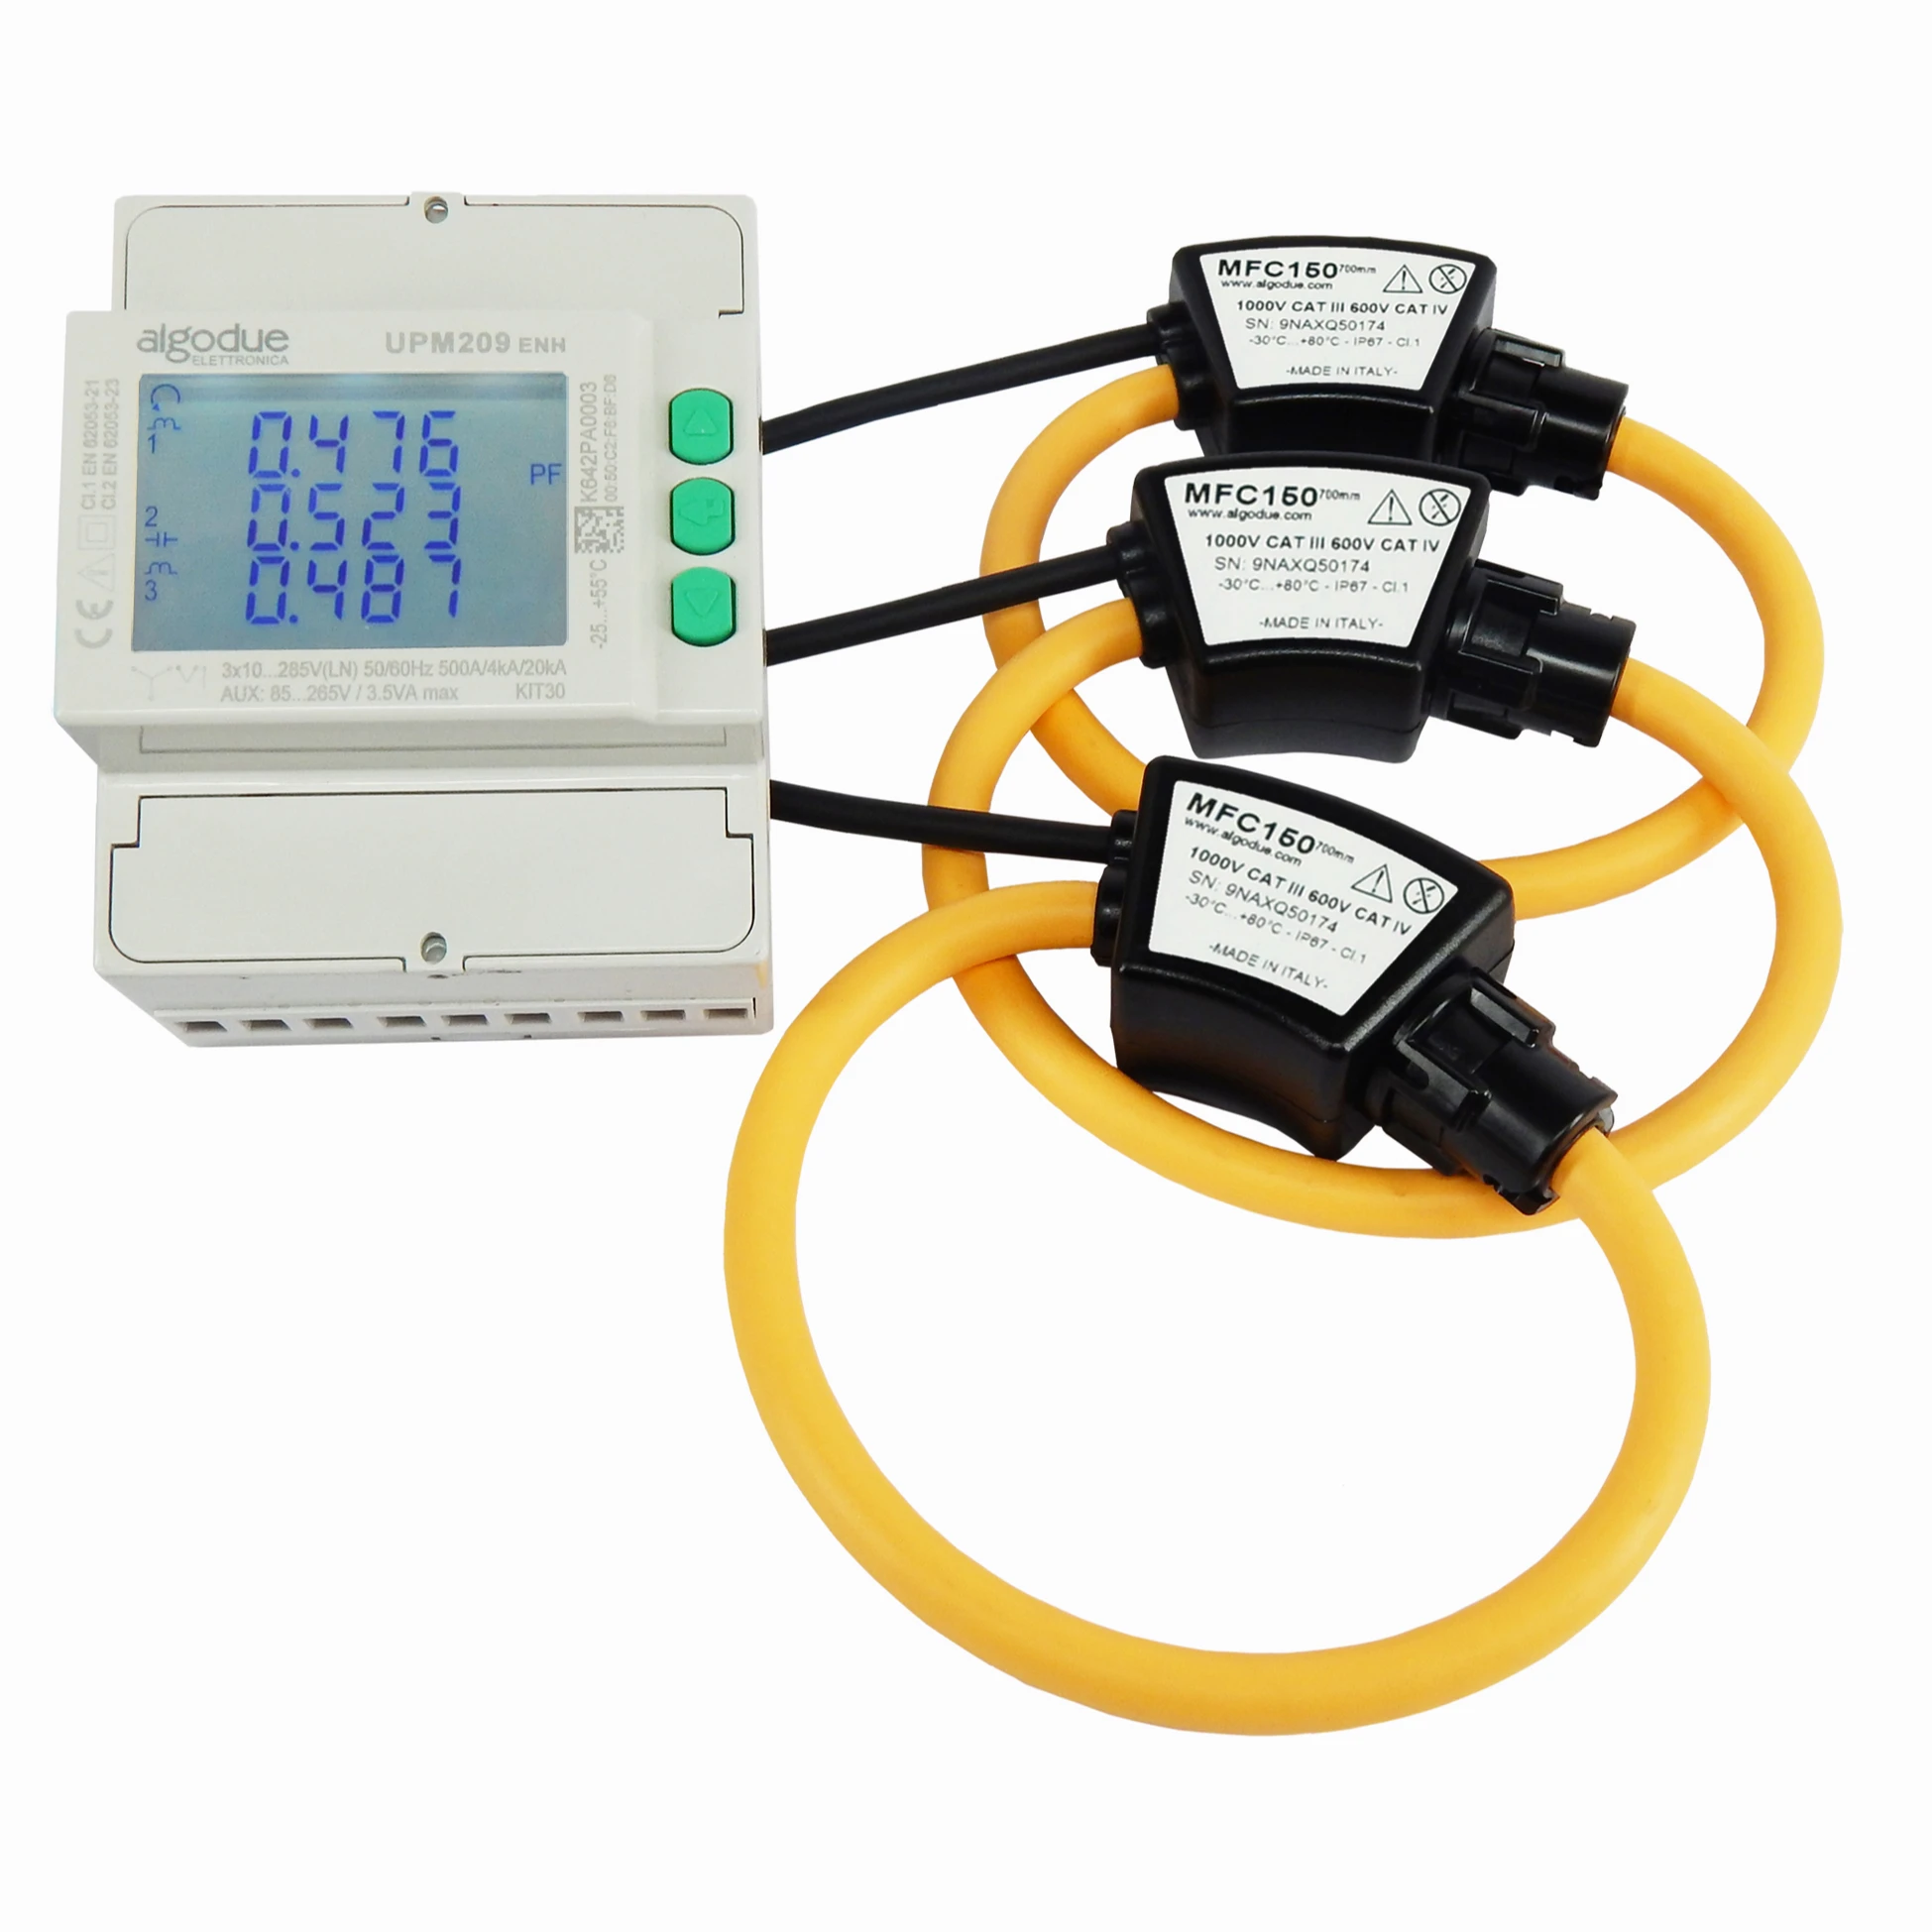 Multifunction 3 Phase Ethernet Meter Rogowski Coils Upm209rgw Algodue Made  In Italy Power Meter - Buy Ethernet Power Meter Network Analyzer Remote  Communication,Flexible Rogowski Coil Current